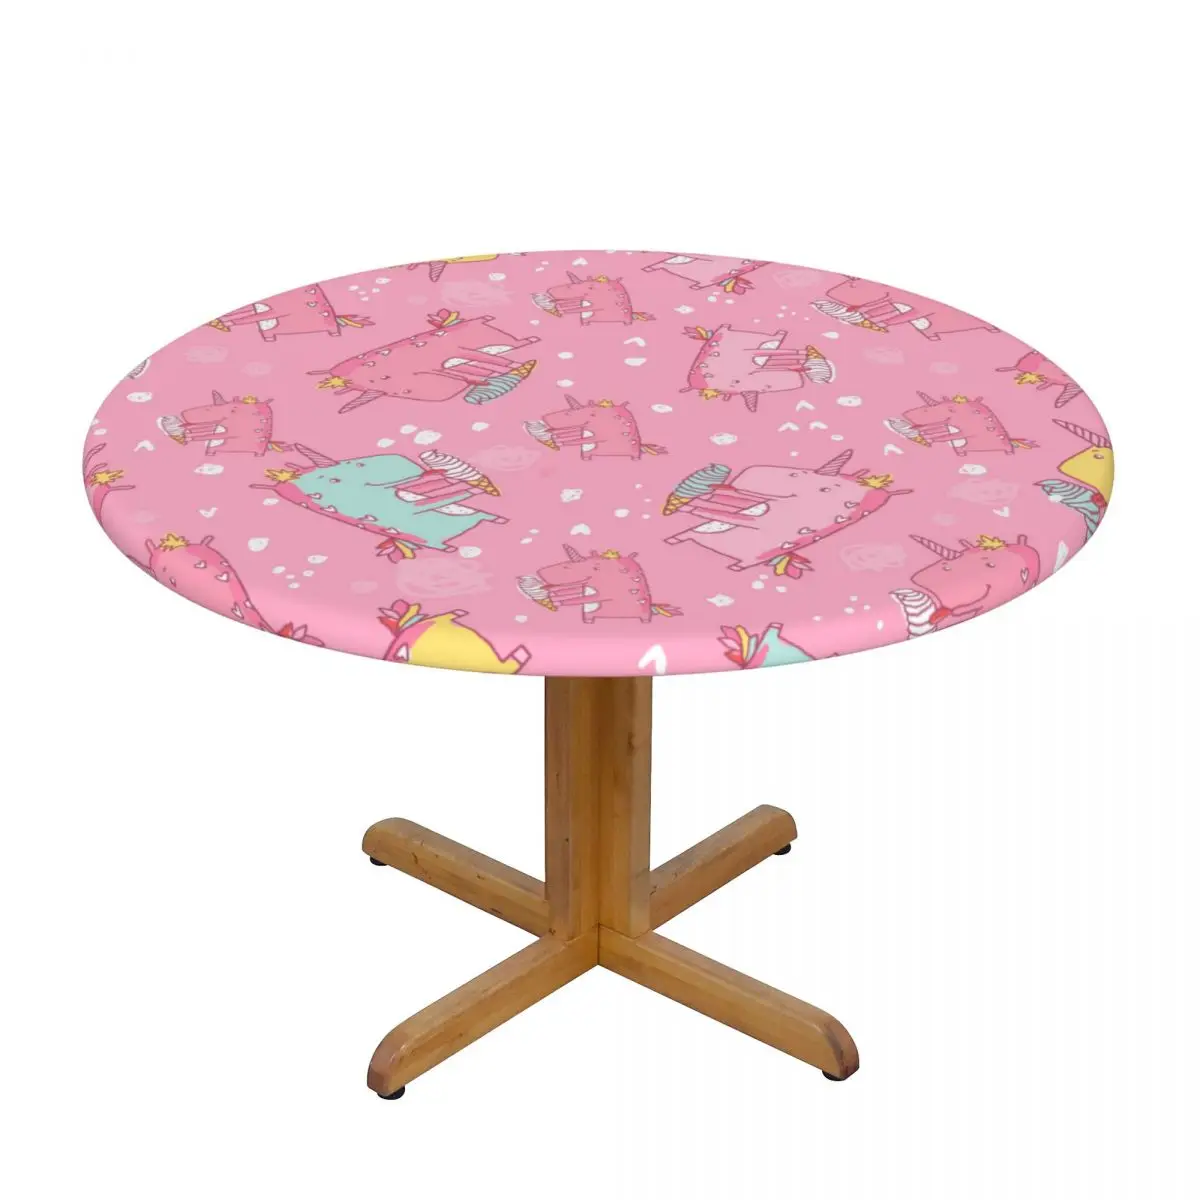 

Modern Round Table Cover Stretch Tablecloth Pink Unicorns Eating Unicorn Home Decorative Table Cloth